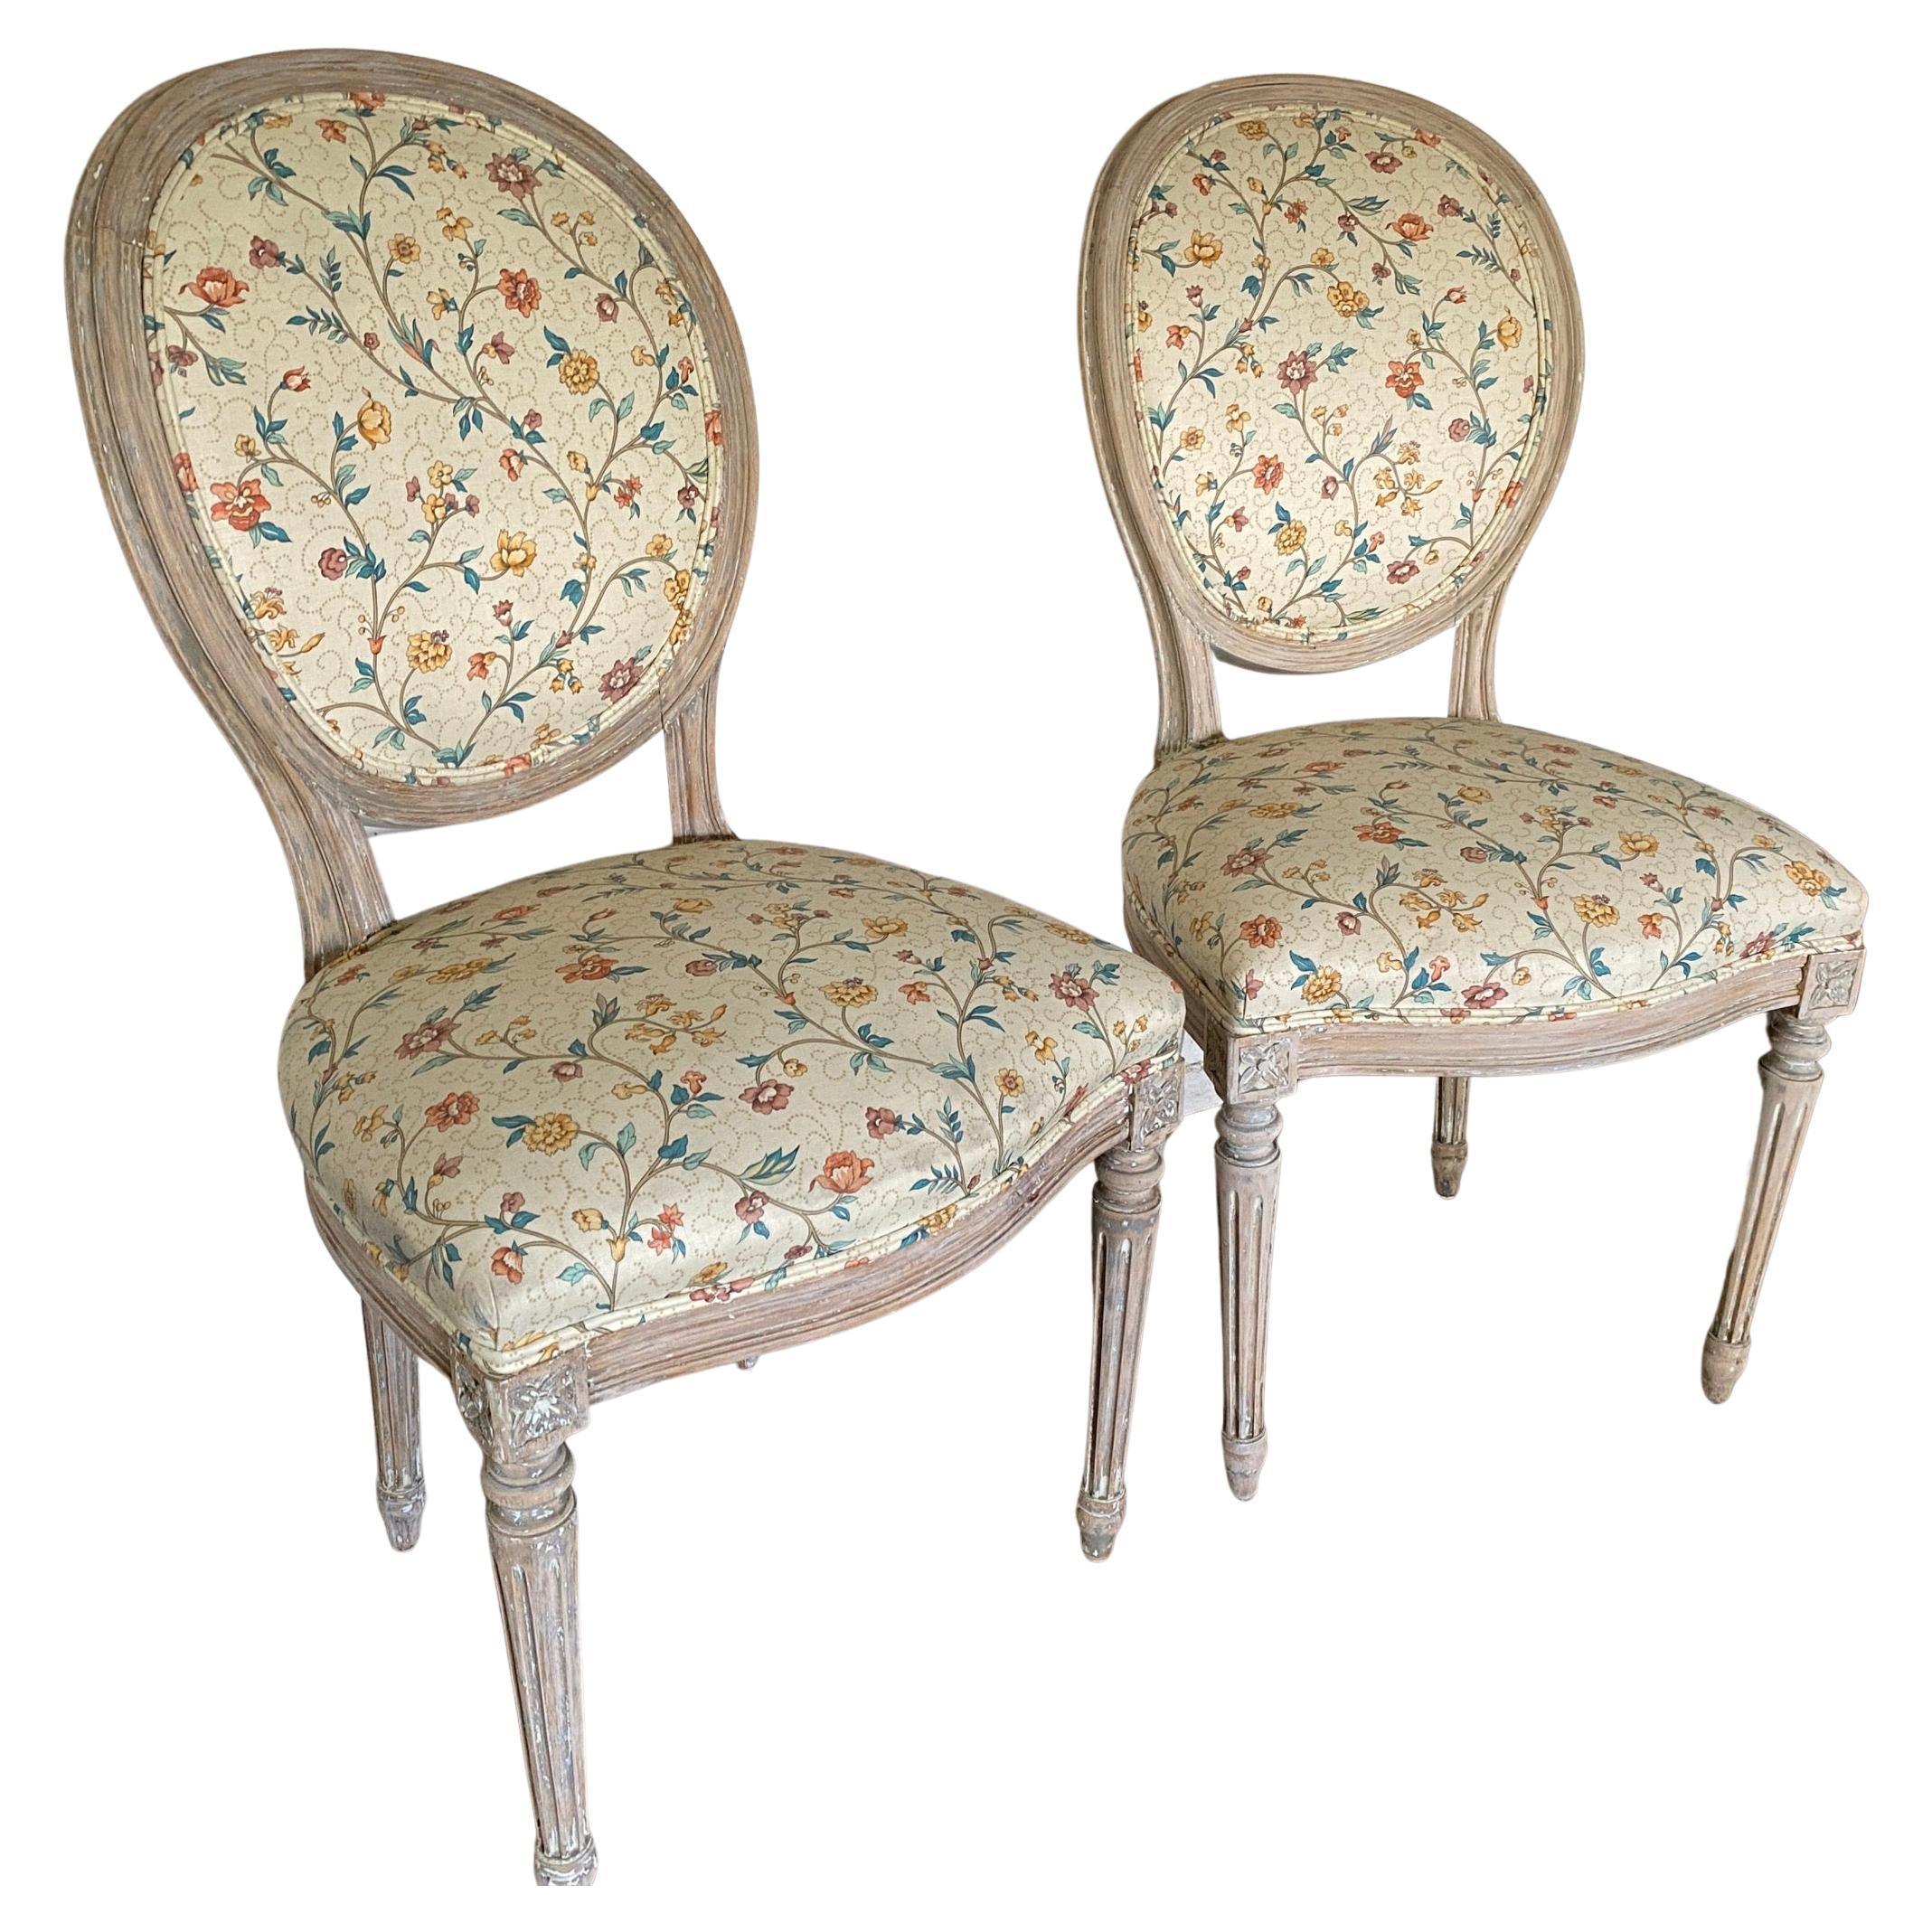 Pair of French Louis XVI style, aged patinated painted side chairs with oval backs and fluted legs. The distress paint gives the chairs added character and style. Use for dining or in the bedroom, French, Swedish Gustavian, country or classic modern